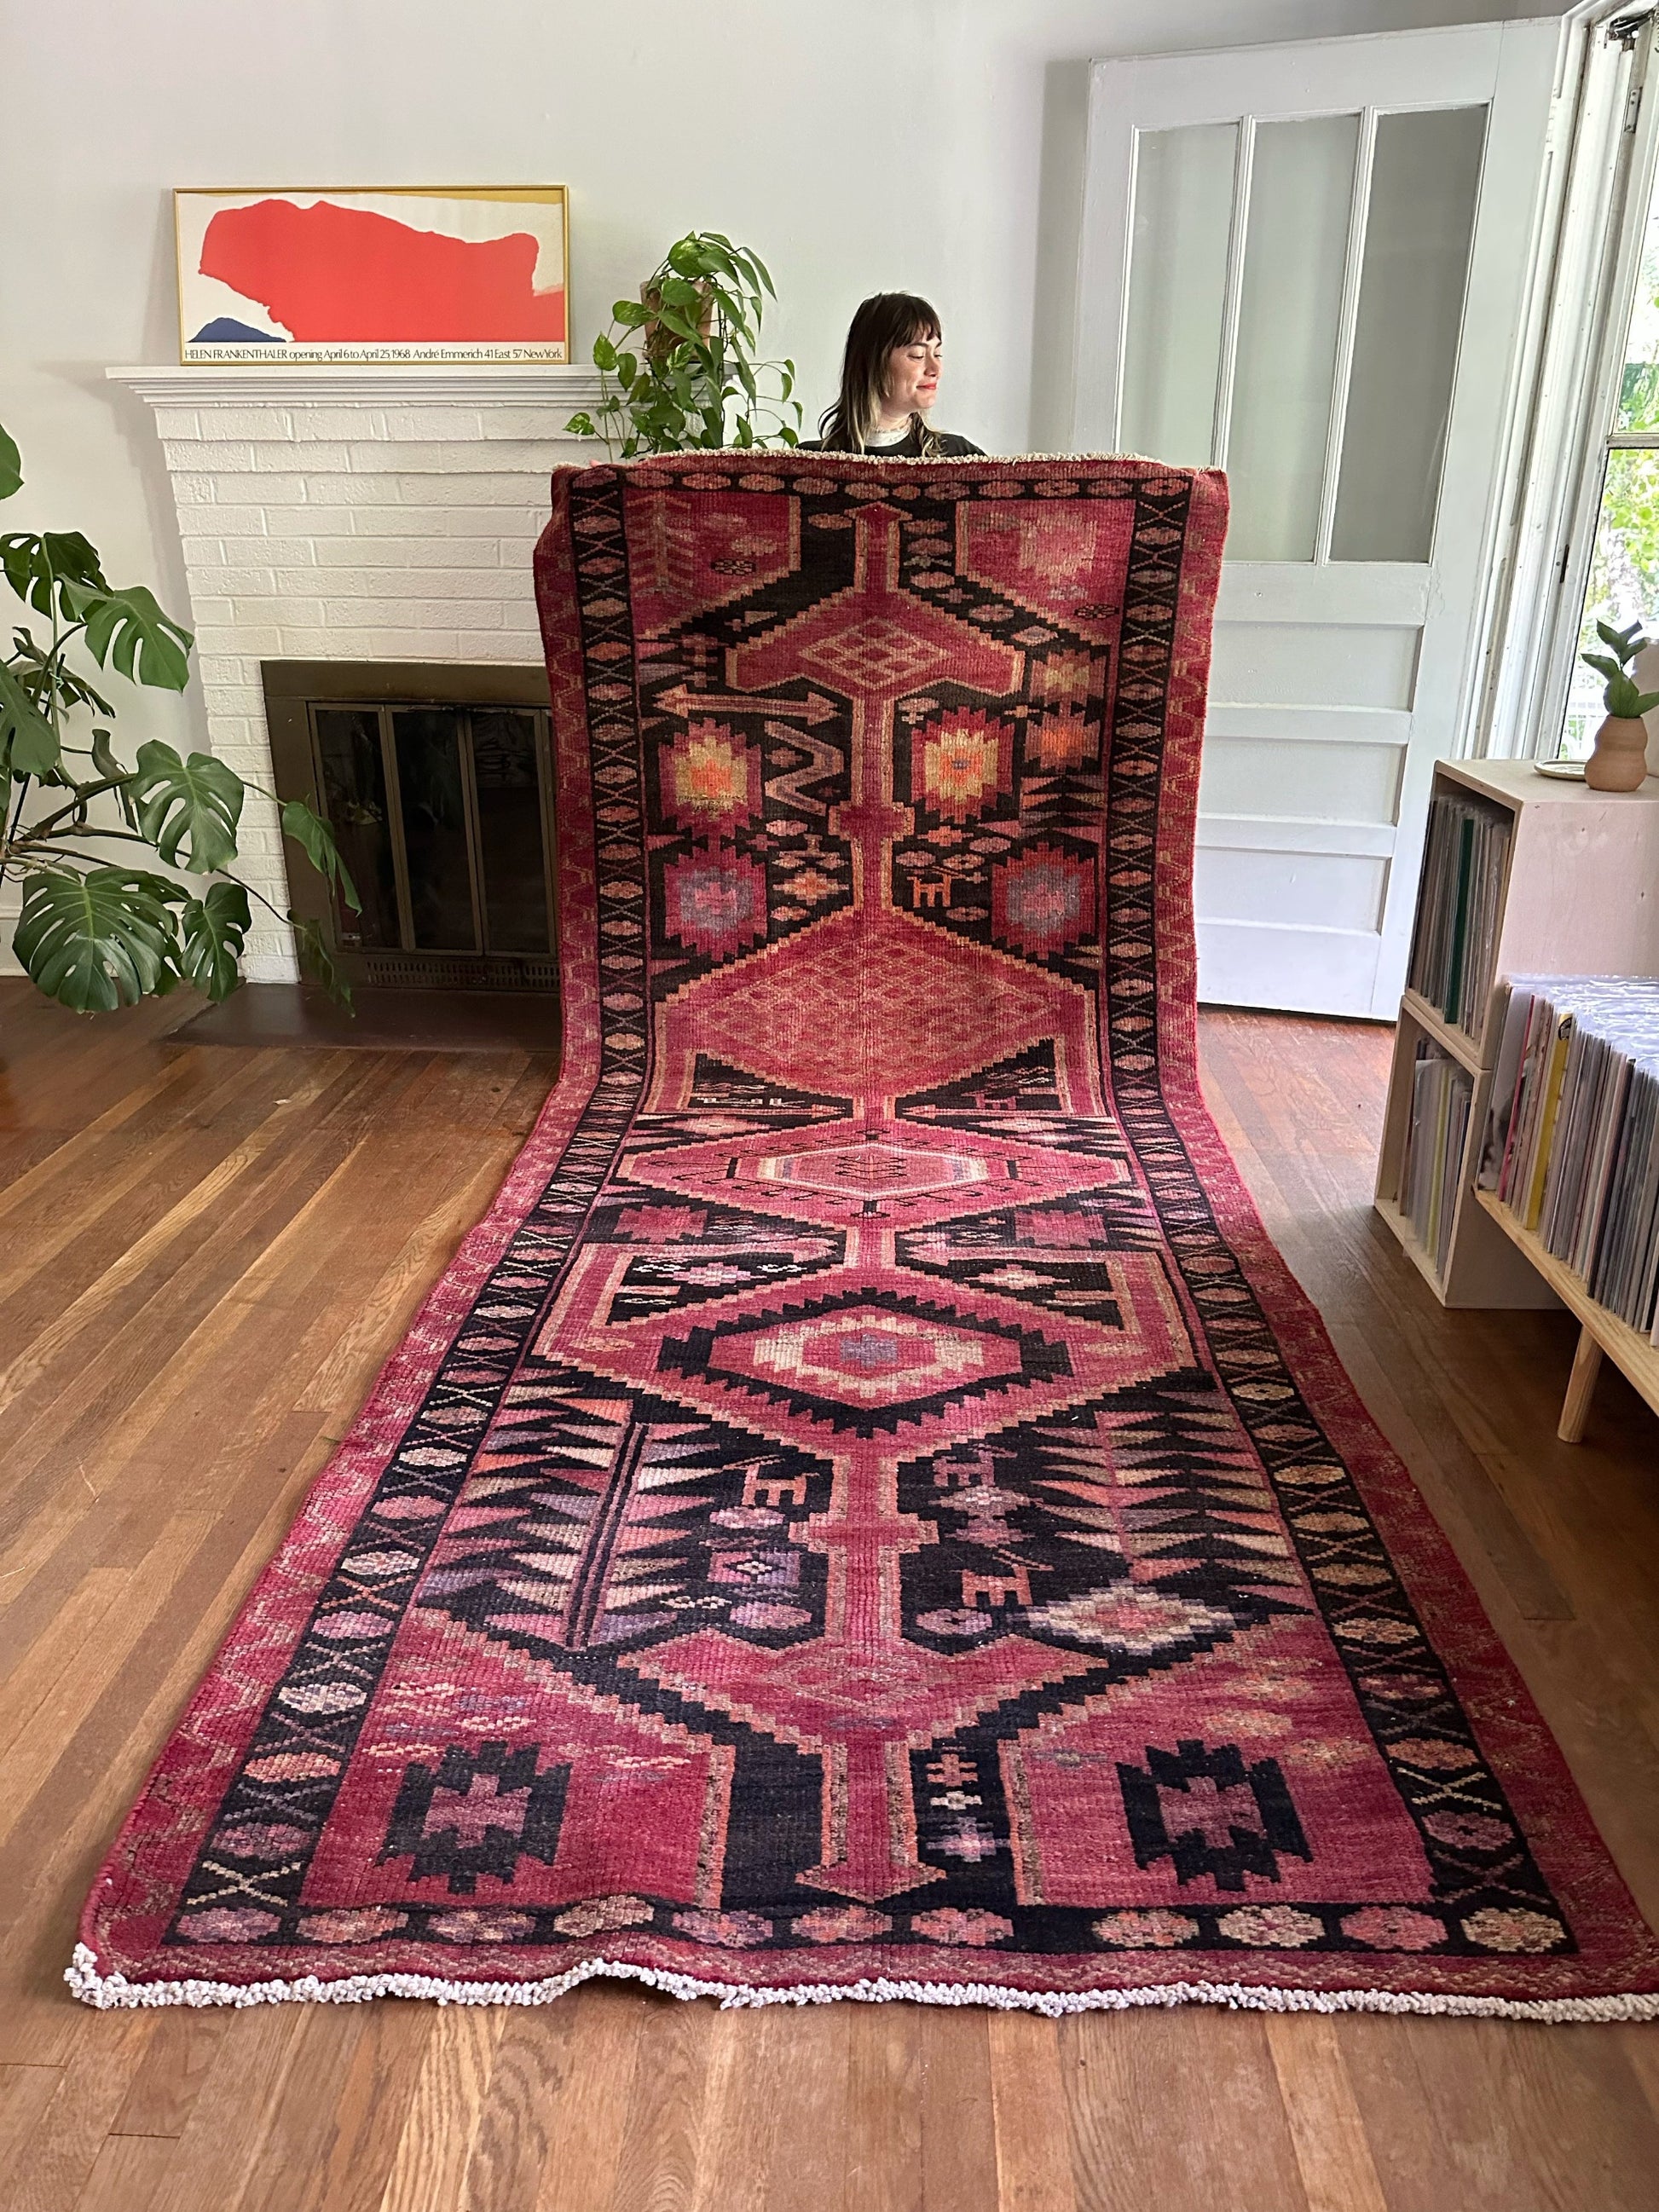 Geometric Traditional Designs in Lavender, Cream, and Terracotta on a Charcoal Rug